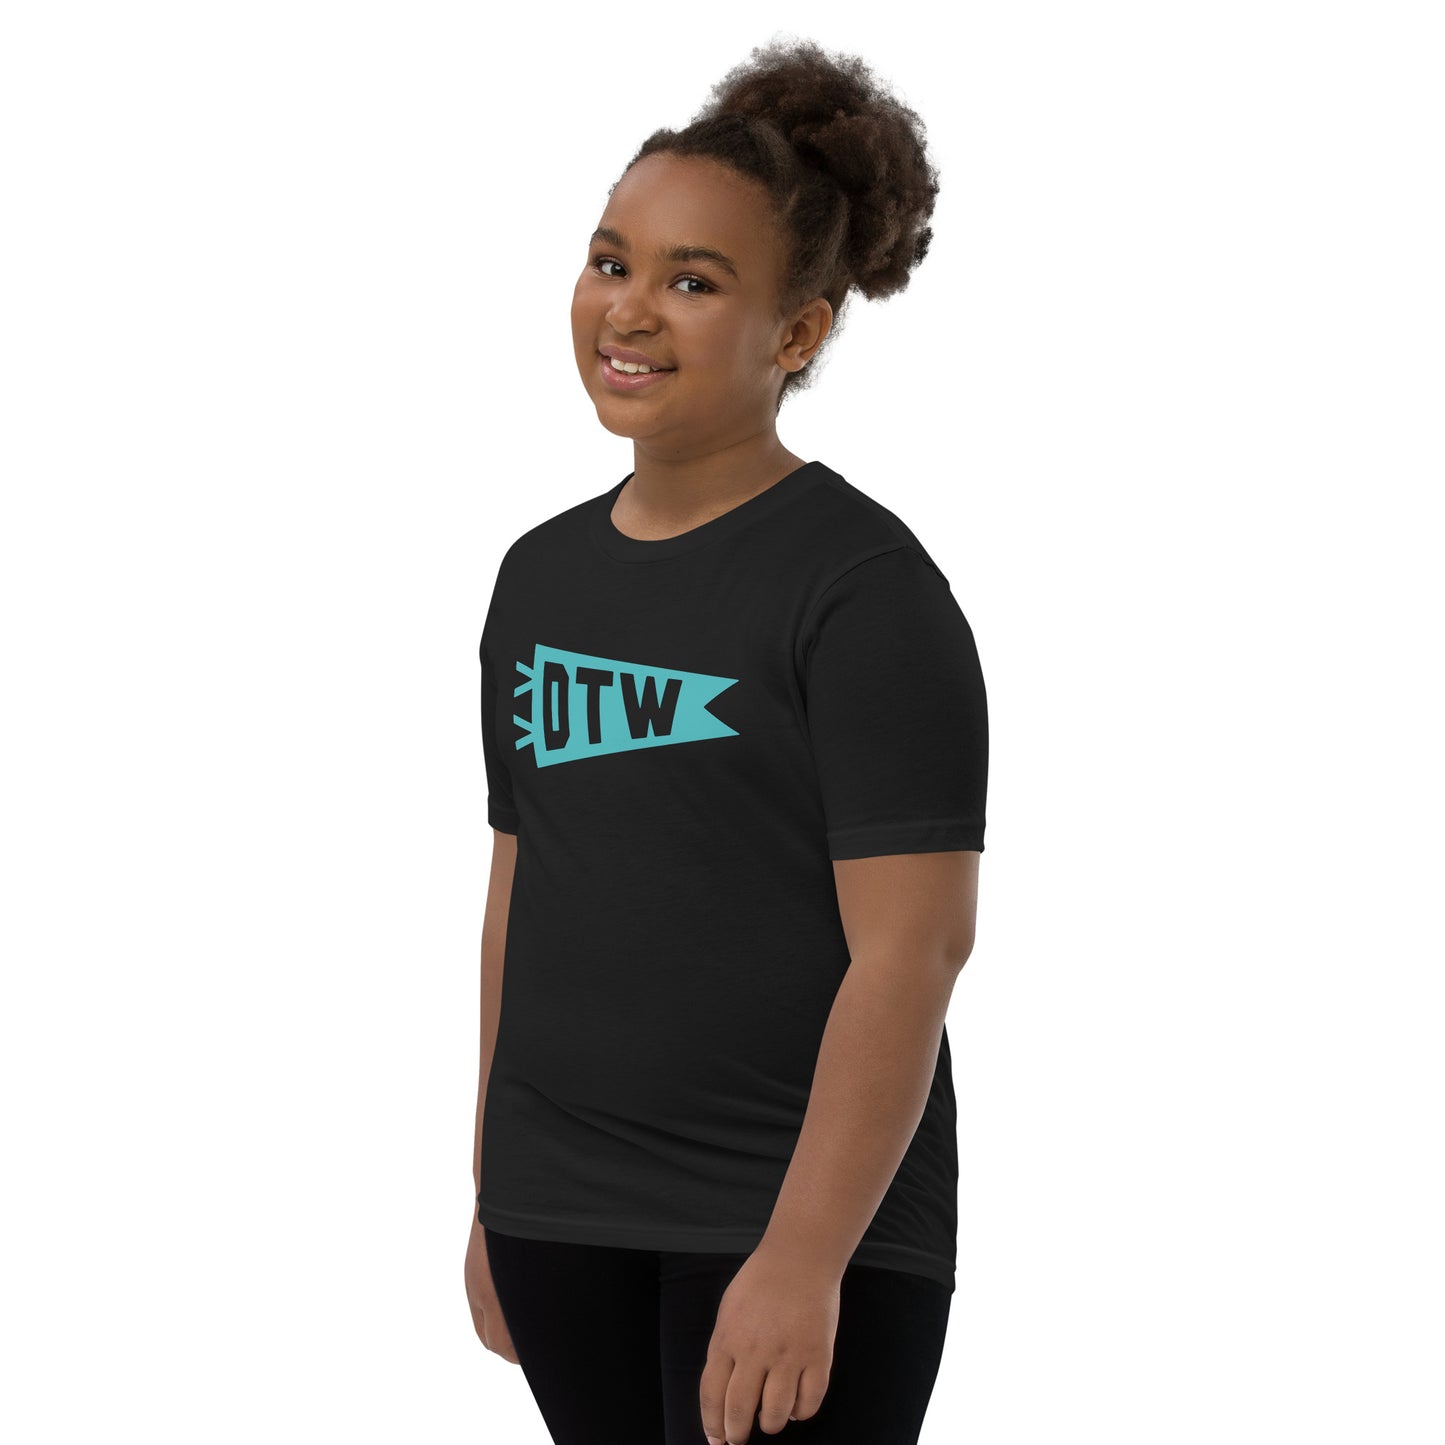 Kid's Airport Code Tee - Viking Blue Graphic • DTW Detroit • YHM Designs - Image 04